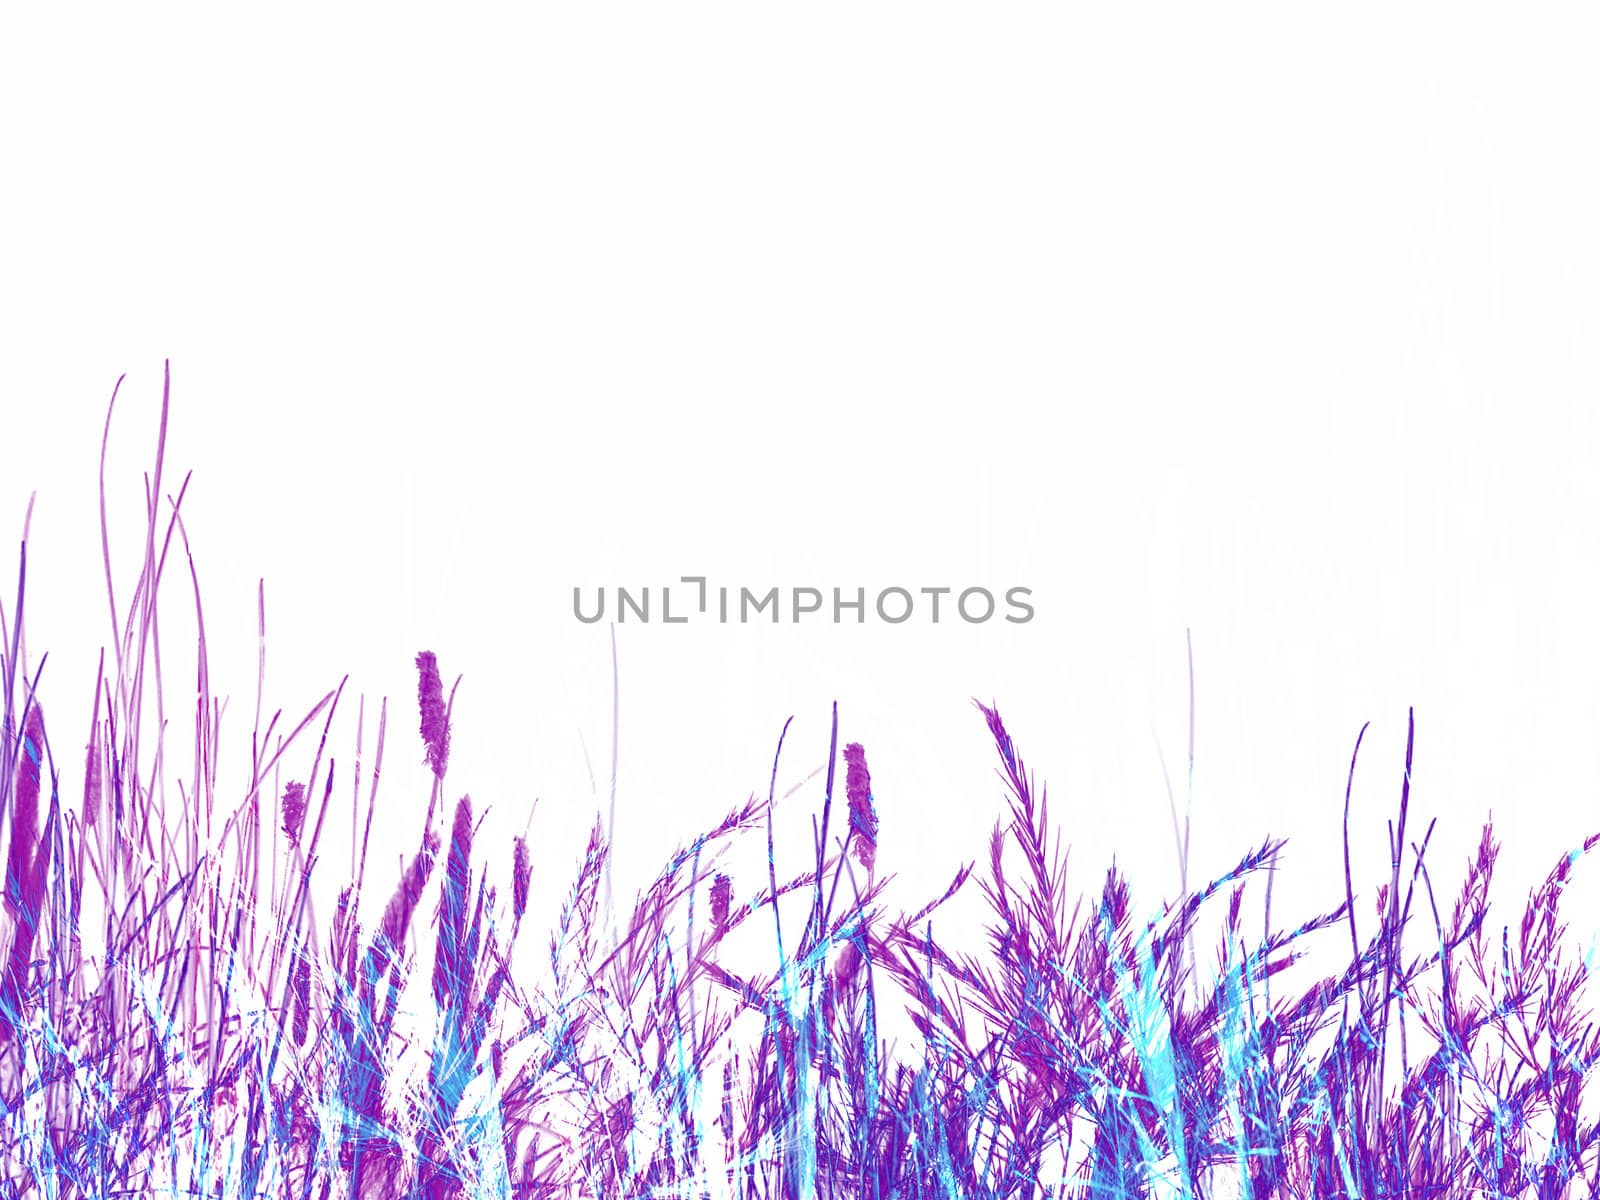 Lilac Purple Grass and Reed Illustration on White Background